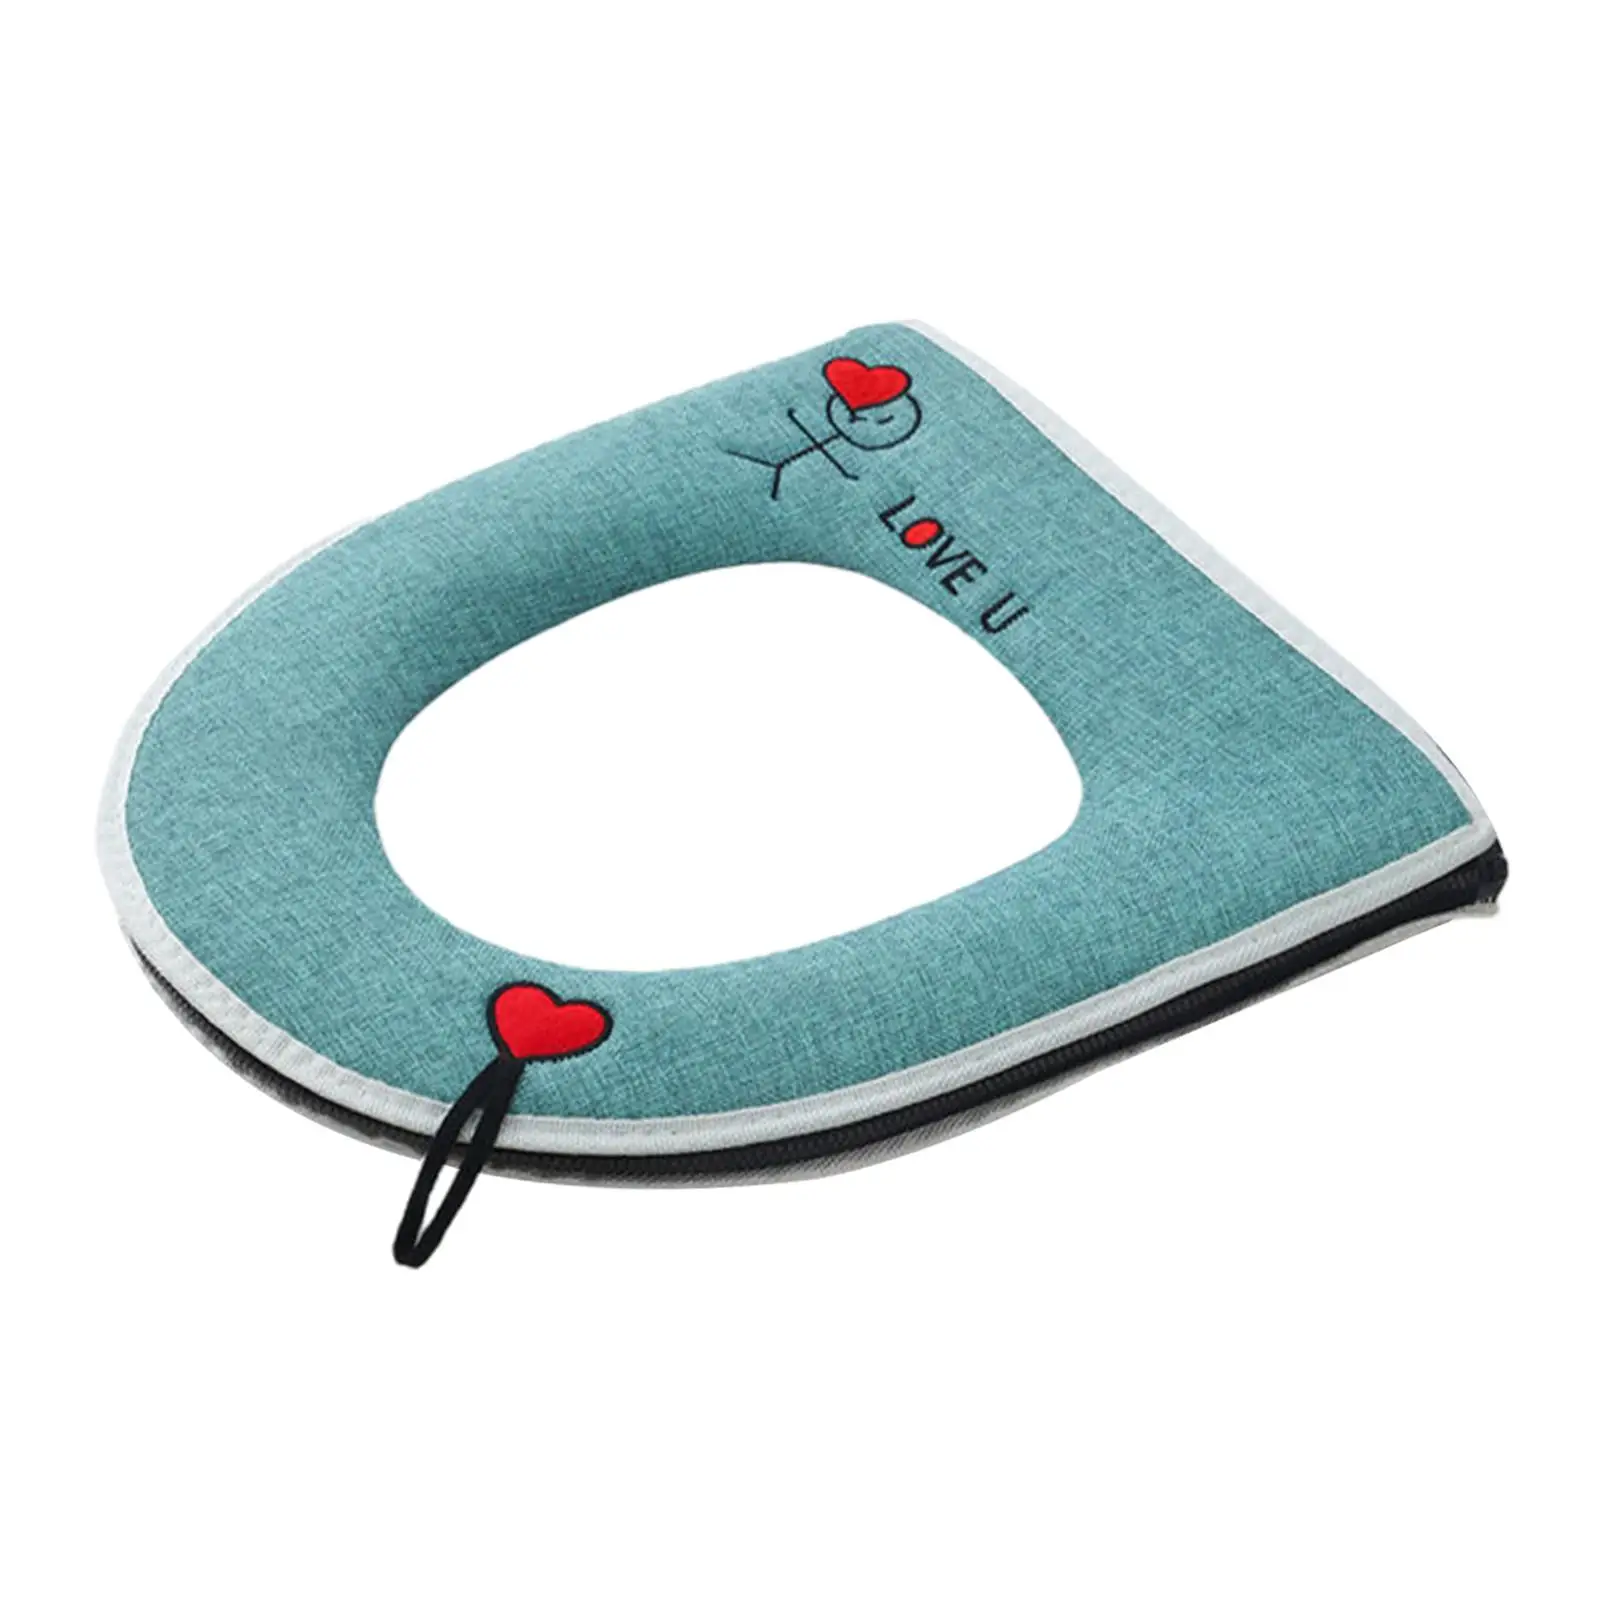 Thicken Toilet Seat Cushion with Handle and Zipper Portable Warm Toilet Seat Covers for Traveling Bathroom Household Home Hotel